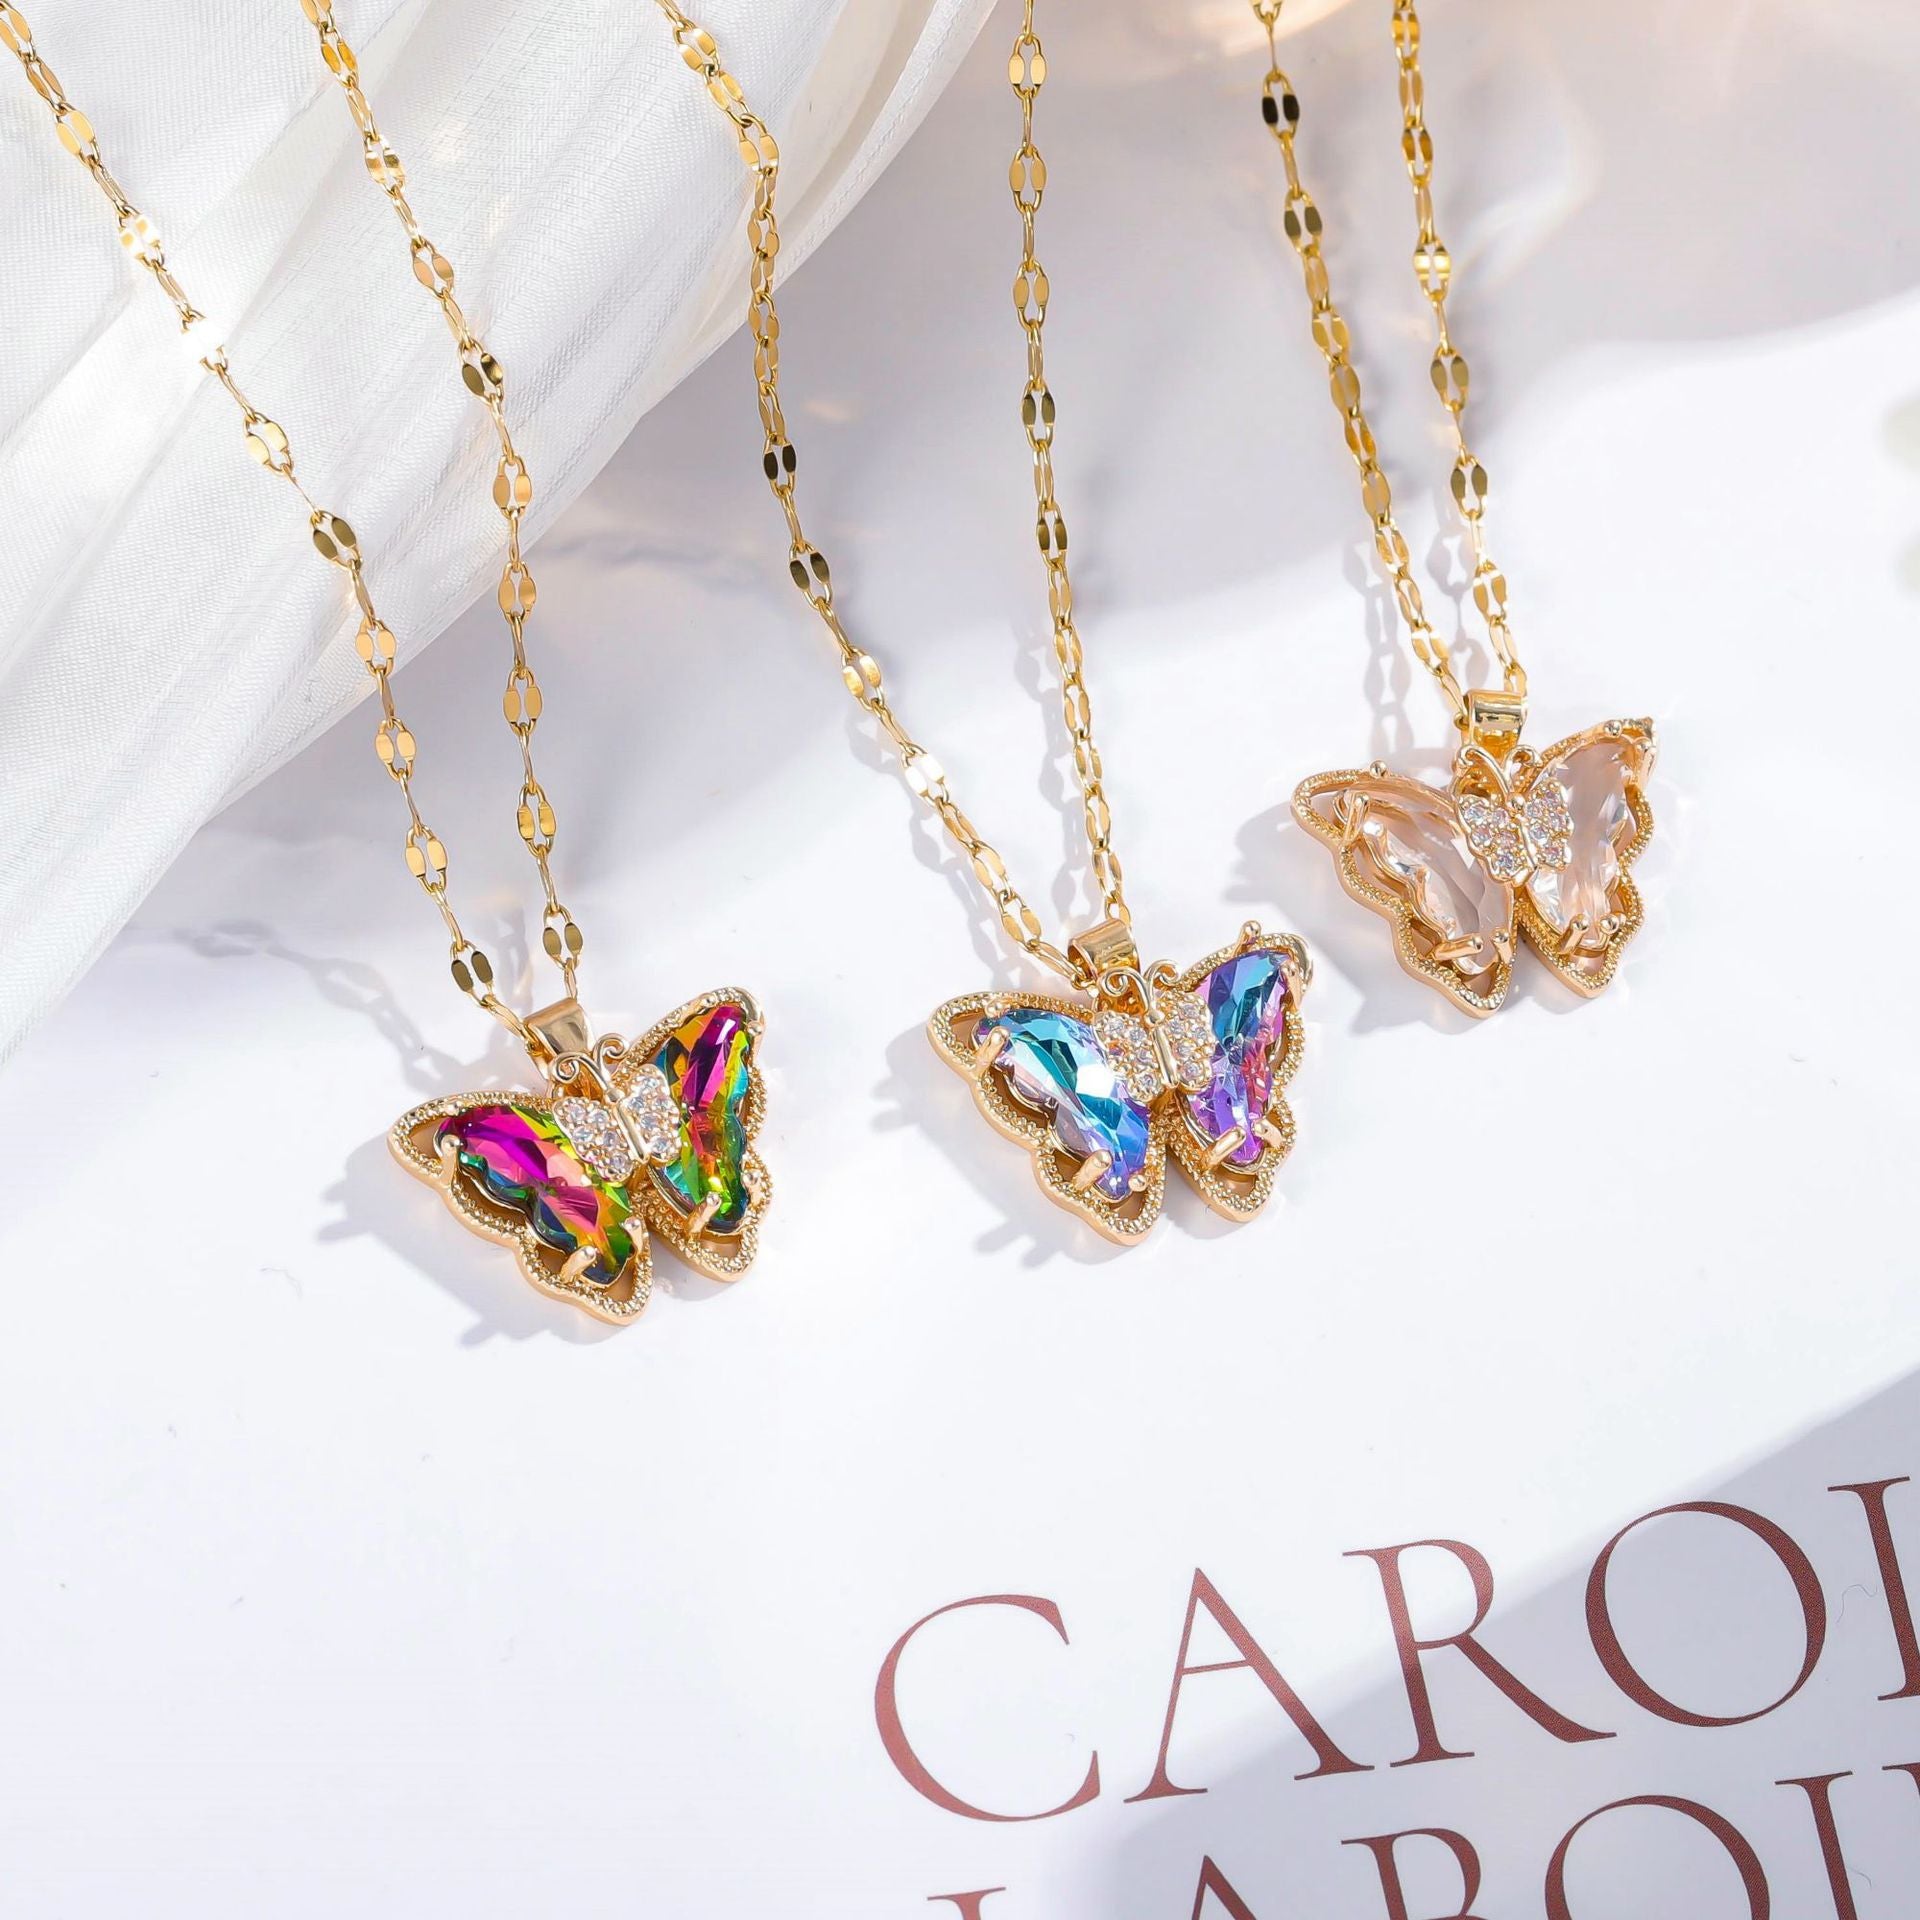 Necklace Female Micro Inlaid Zircon Butterfly Fashion Simple Clavicle Chain